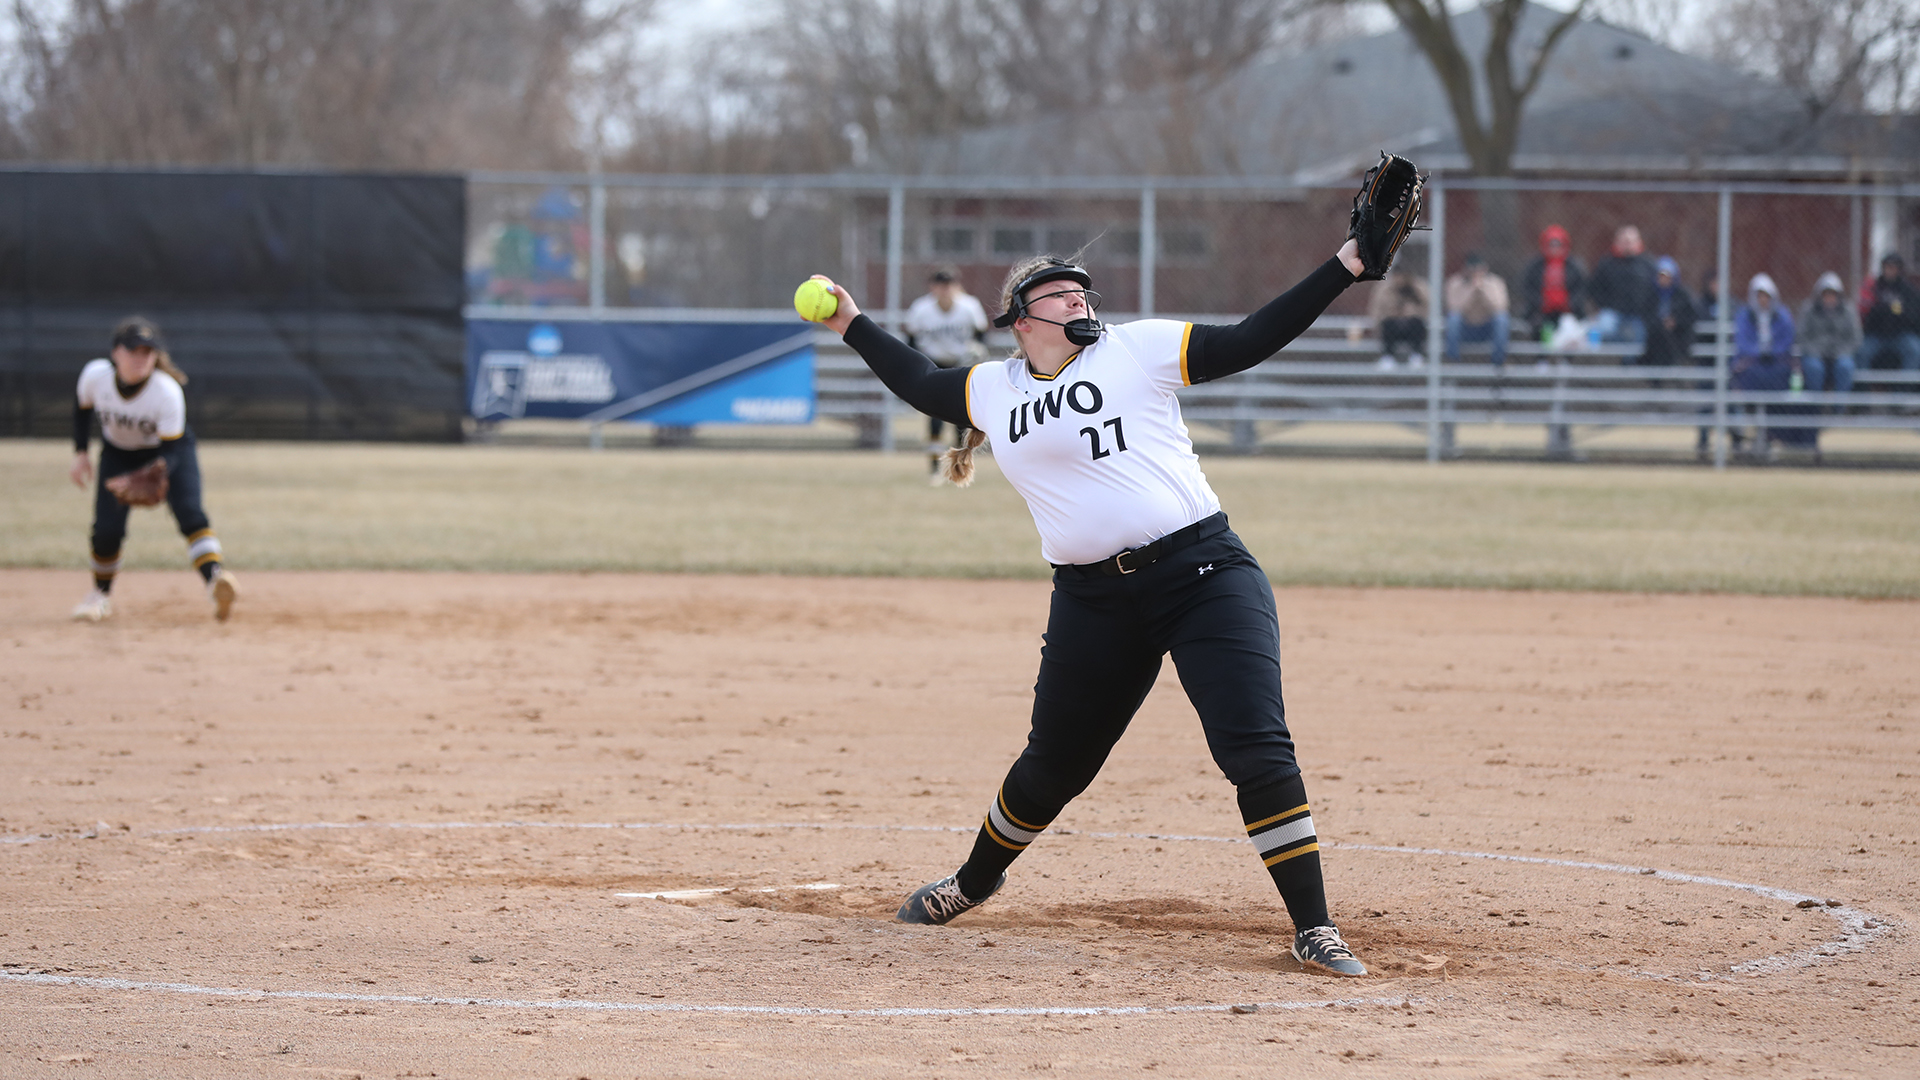 Sydney Nemetz allowed the Falcons just two hits during the Titans' 9-1 victory in the nightcap.